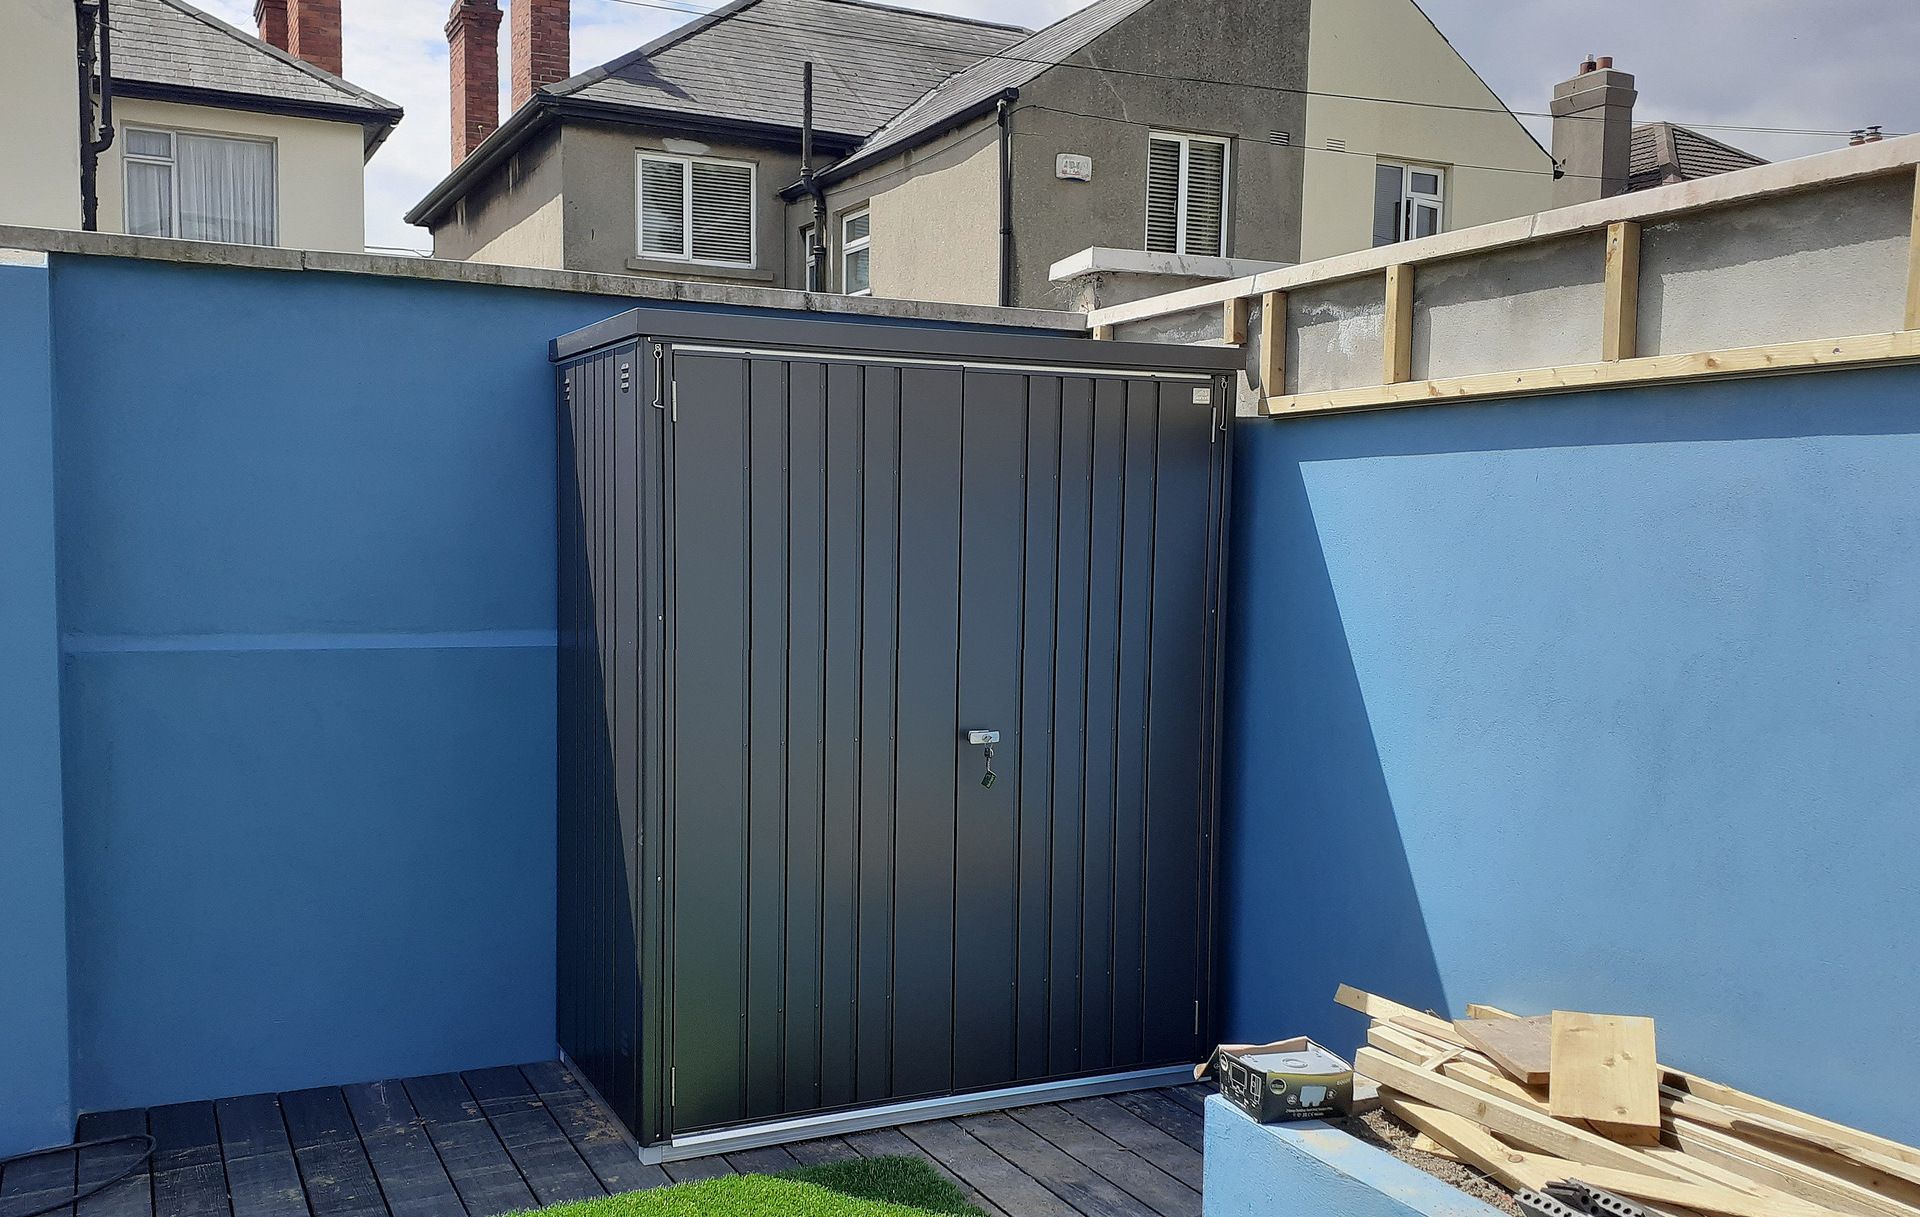 The superb quality and style of the Biohort Equipment Locker 150 in metallic dark grey  with optional accessories including aluminium floor frame, aluminium floor panels | supplied + installed in Glasnevin by Owen Chubb Landscapers. Tel 087-2306 128.